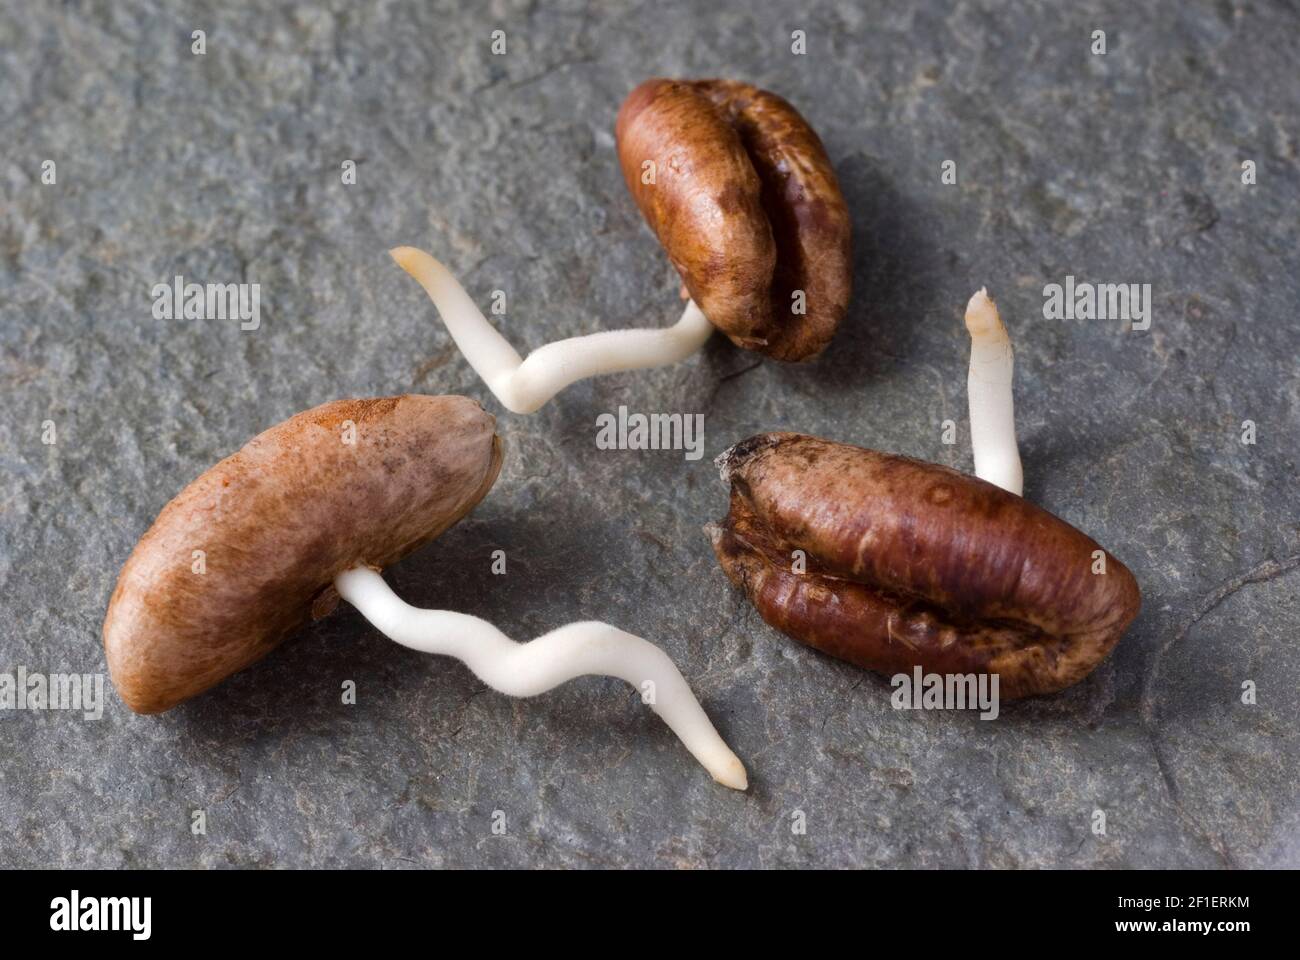 Germinating Date Palm Seeds Stock Photo